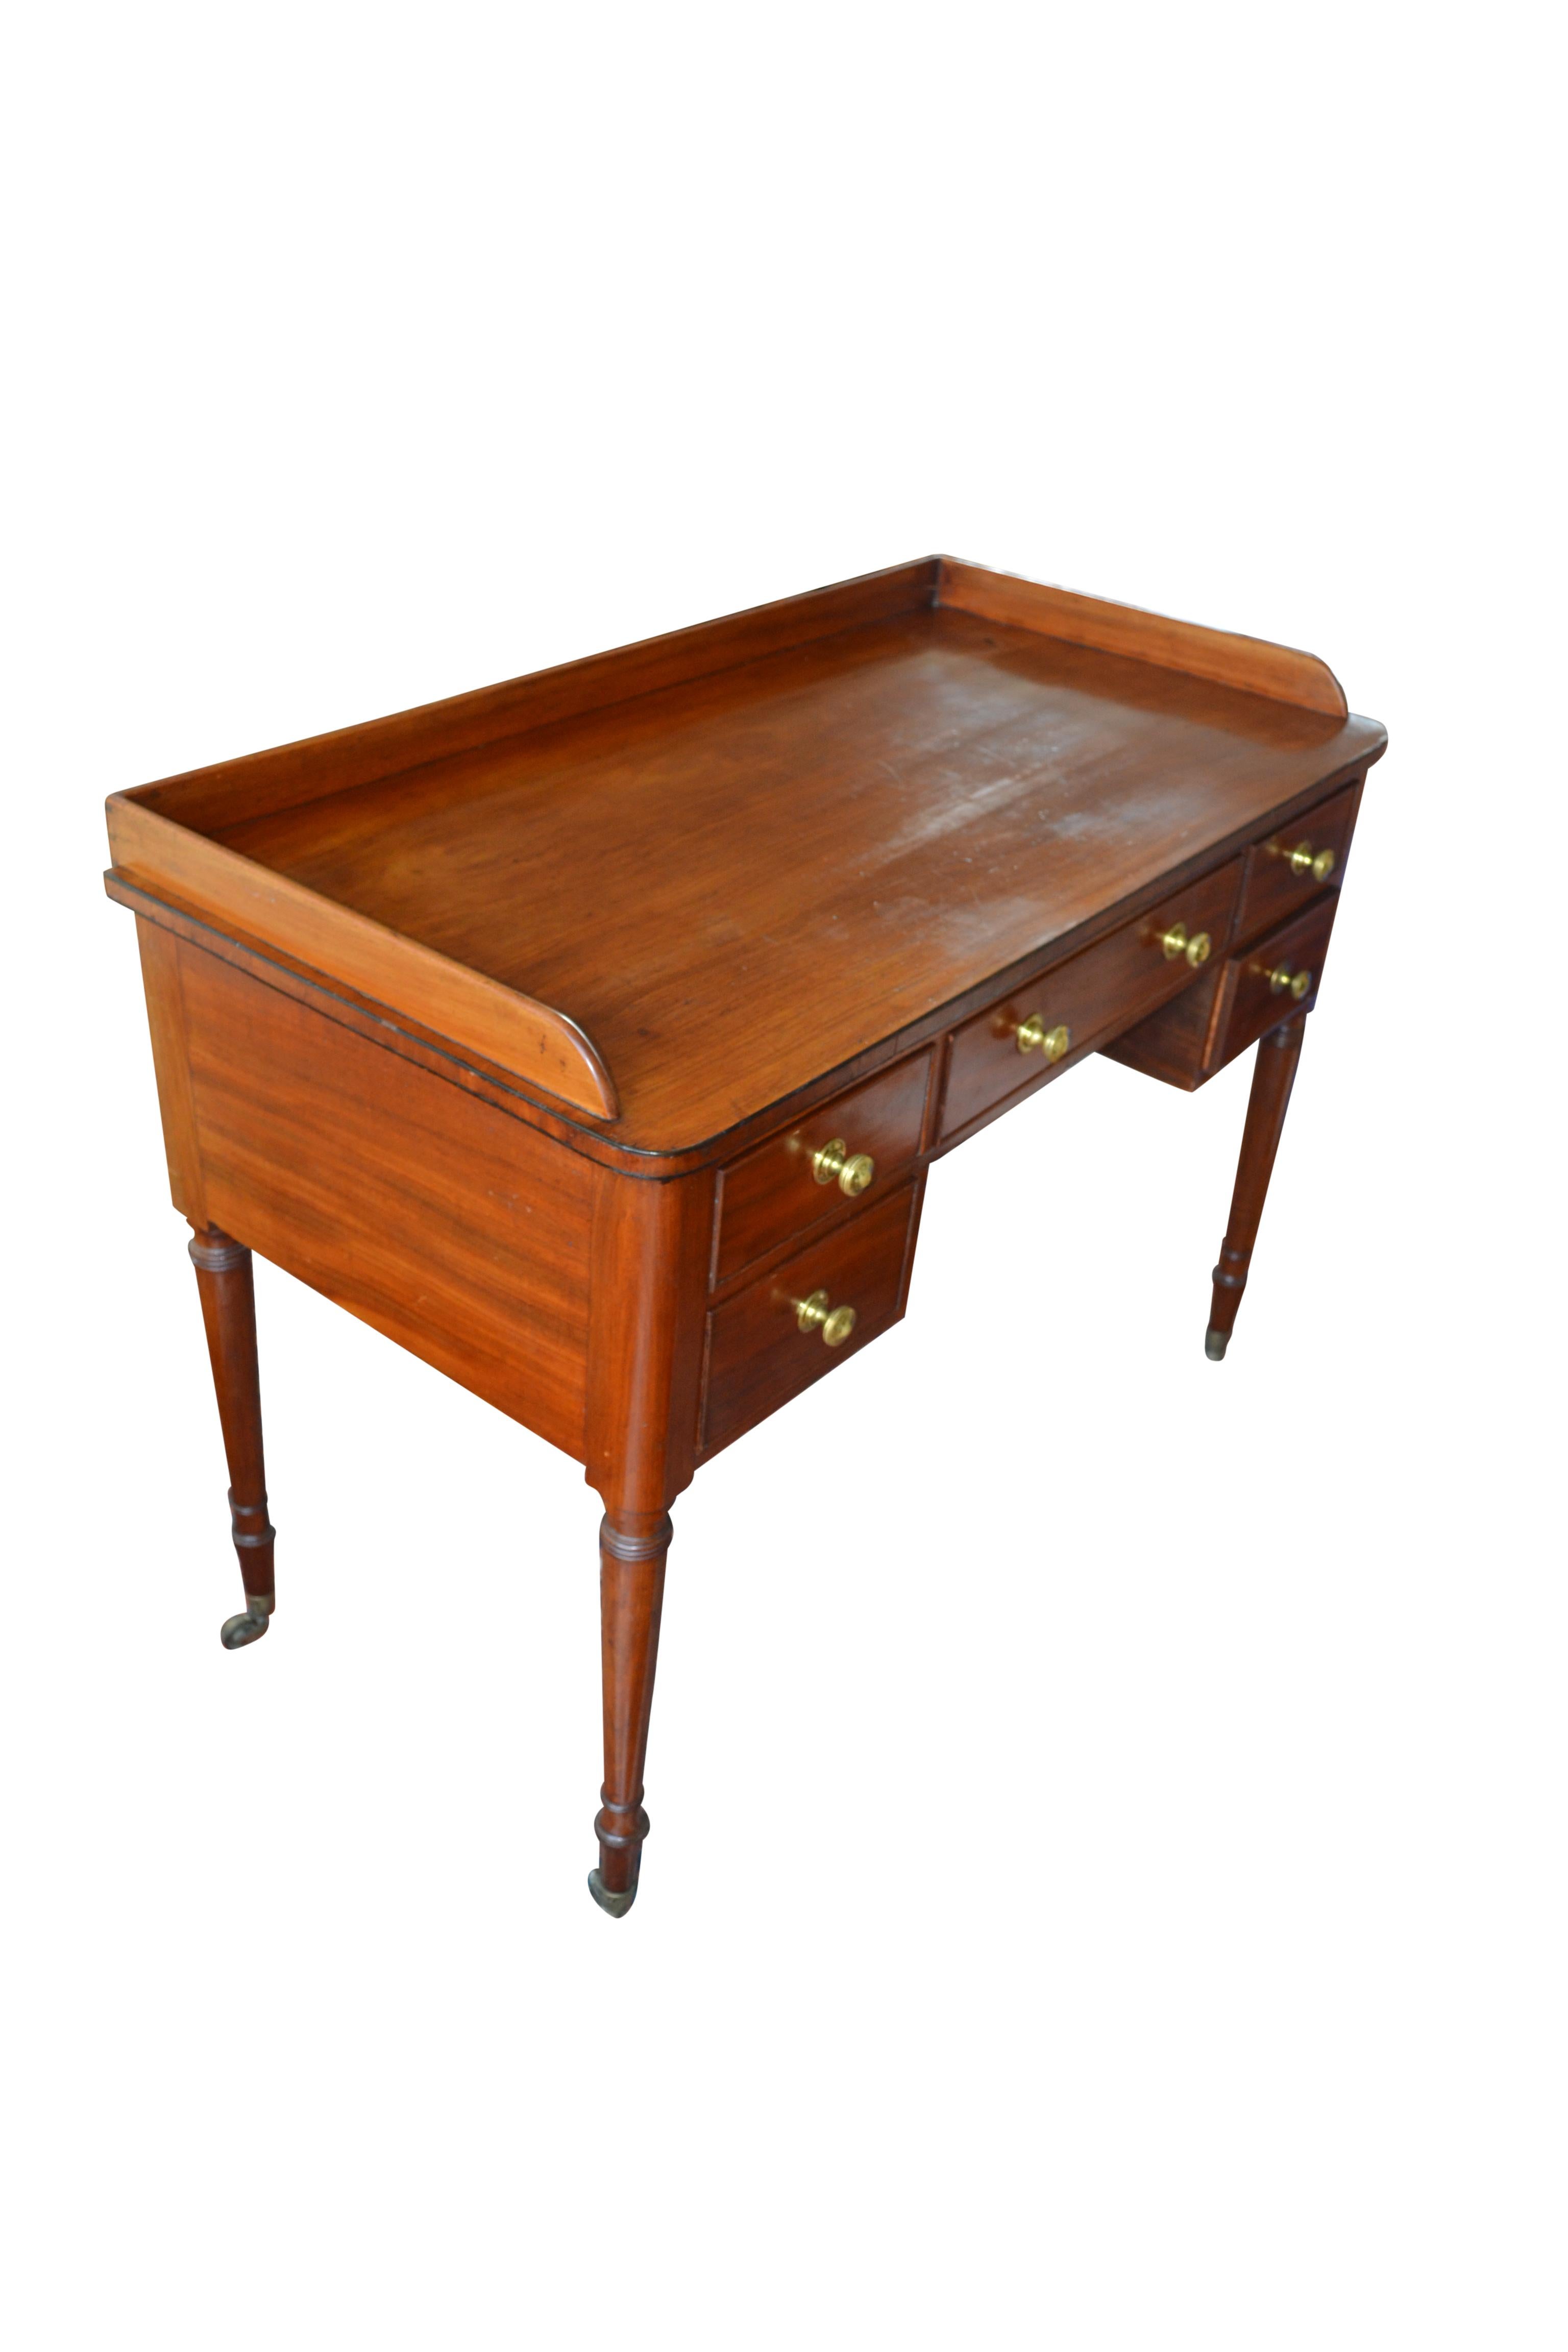 A finely figured English Regency mahogany desk/table/dressing table/sideboard with a three quarter wooden gallery over five drawers with their original brass hardware. The table rests on four turned and tapered legs also with their original brass